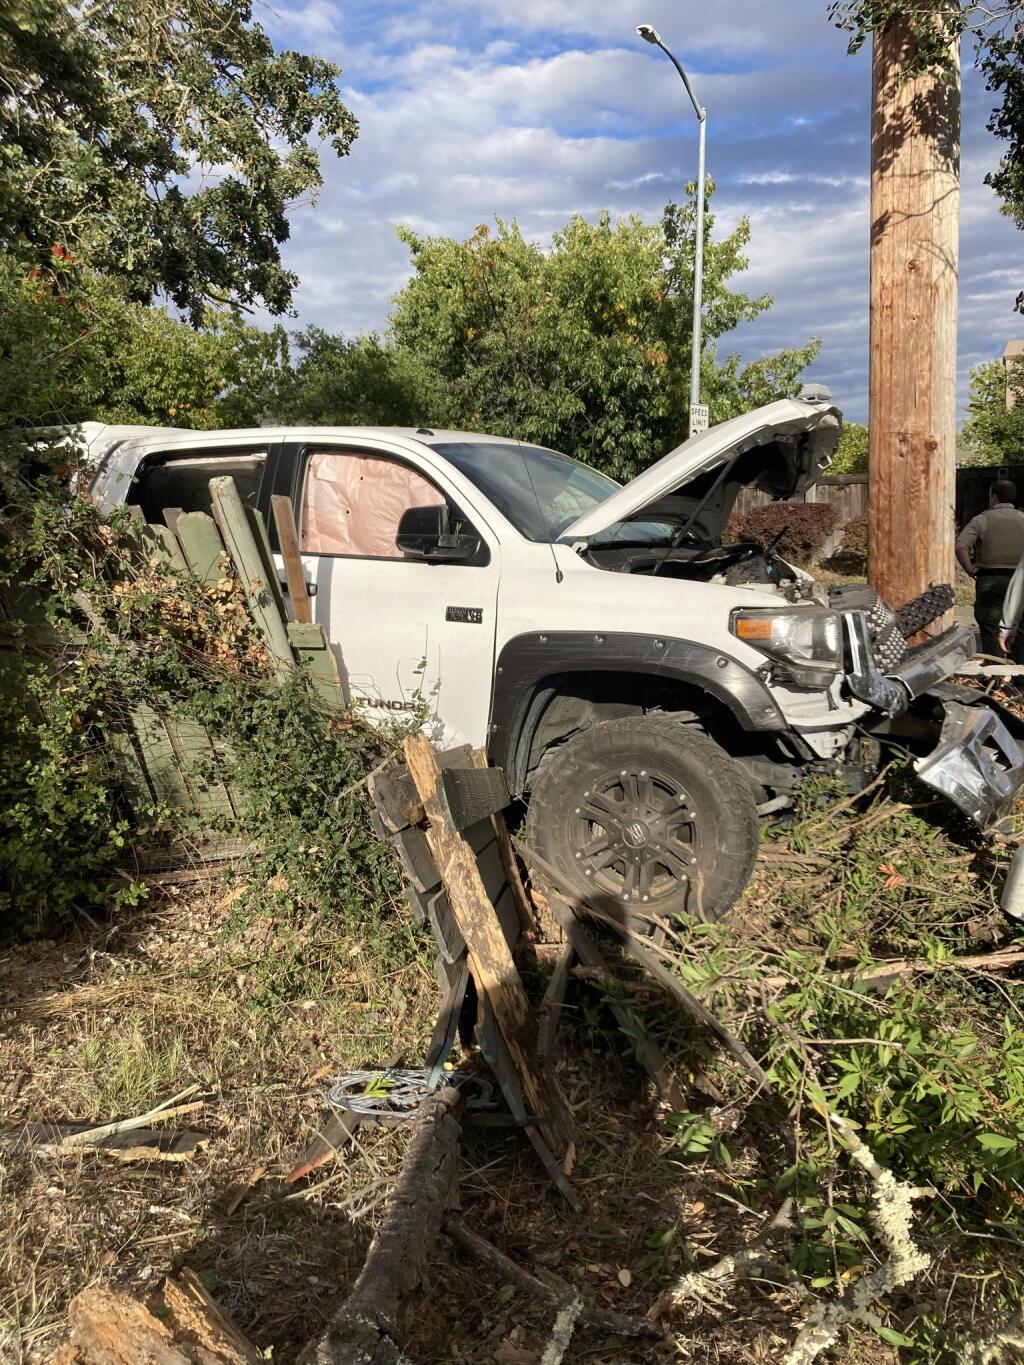 A man was arrested on suspicion of DUI after the vehicle he was driving struck another vehicle and a power pole, Monday, Oct. 16, 2023. (Windsor Police Department)